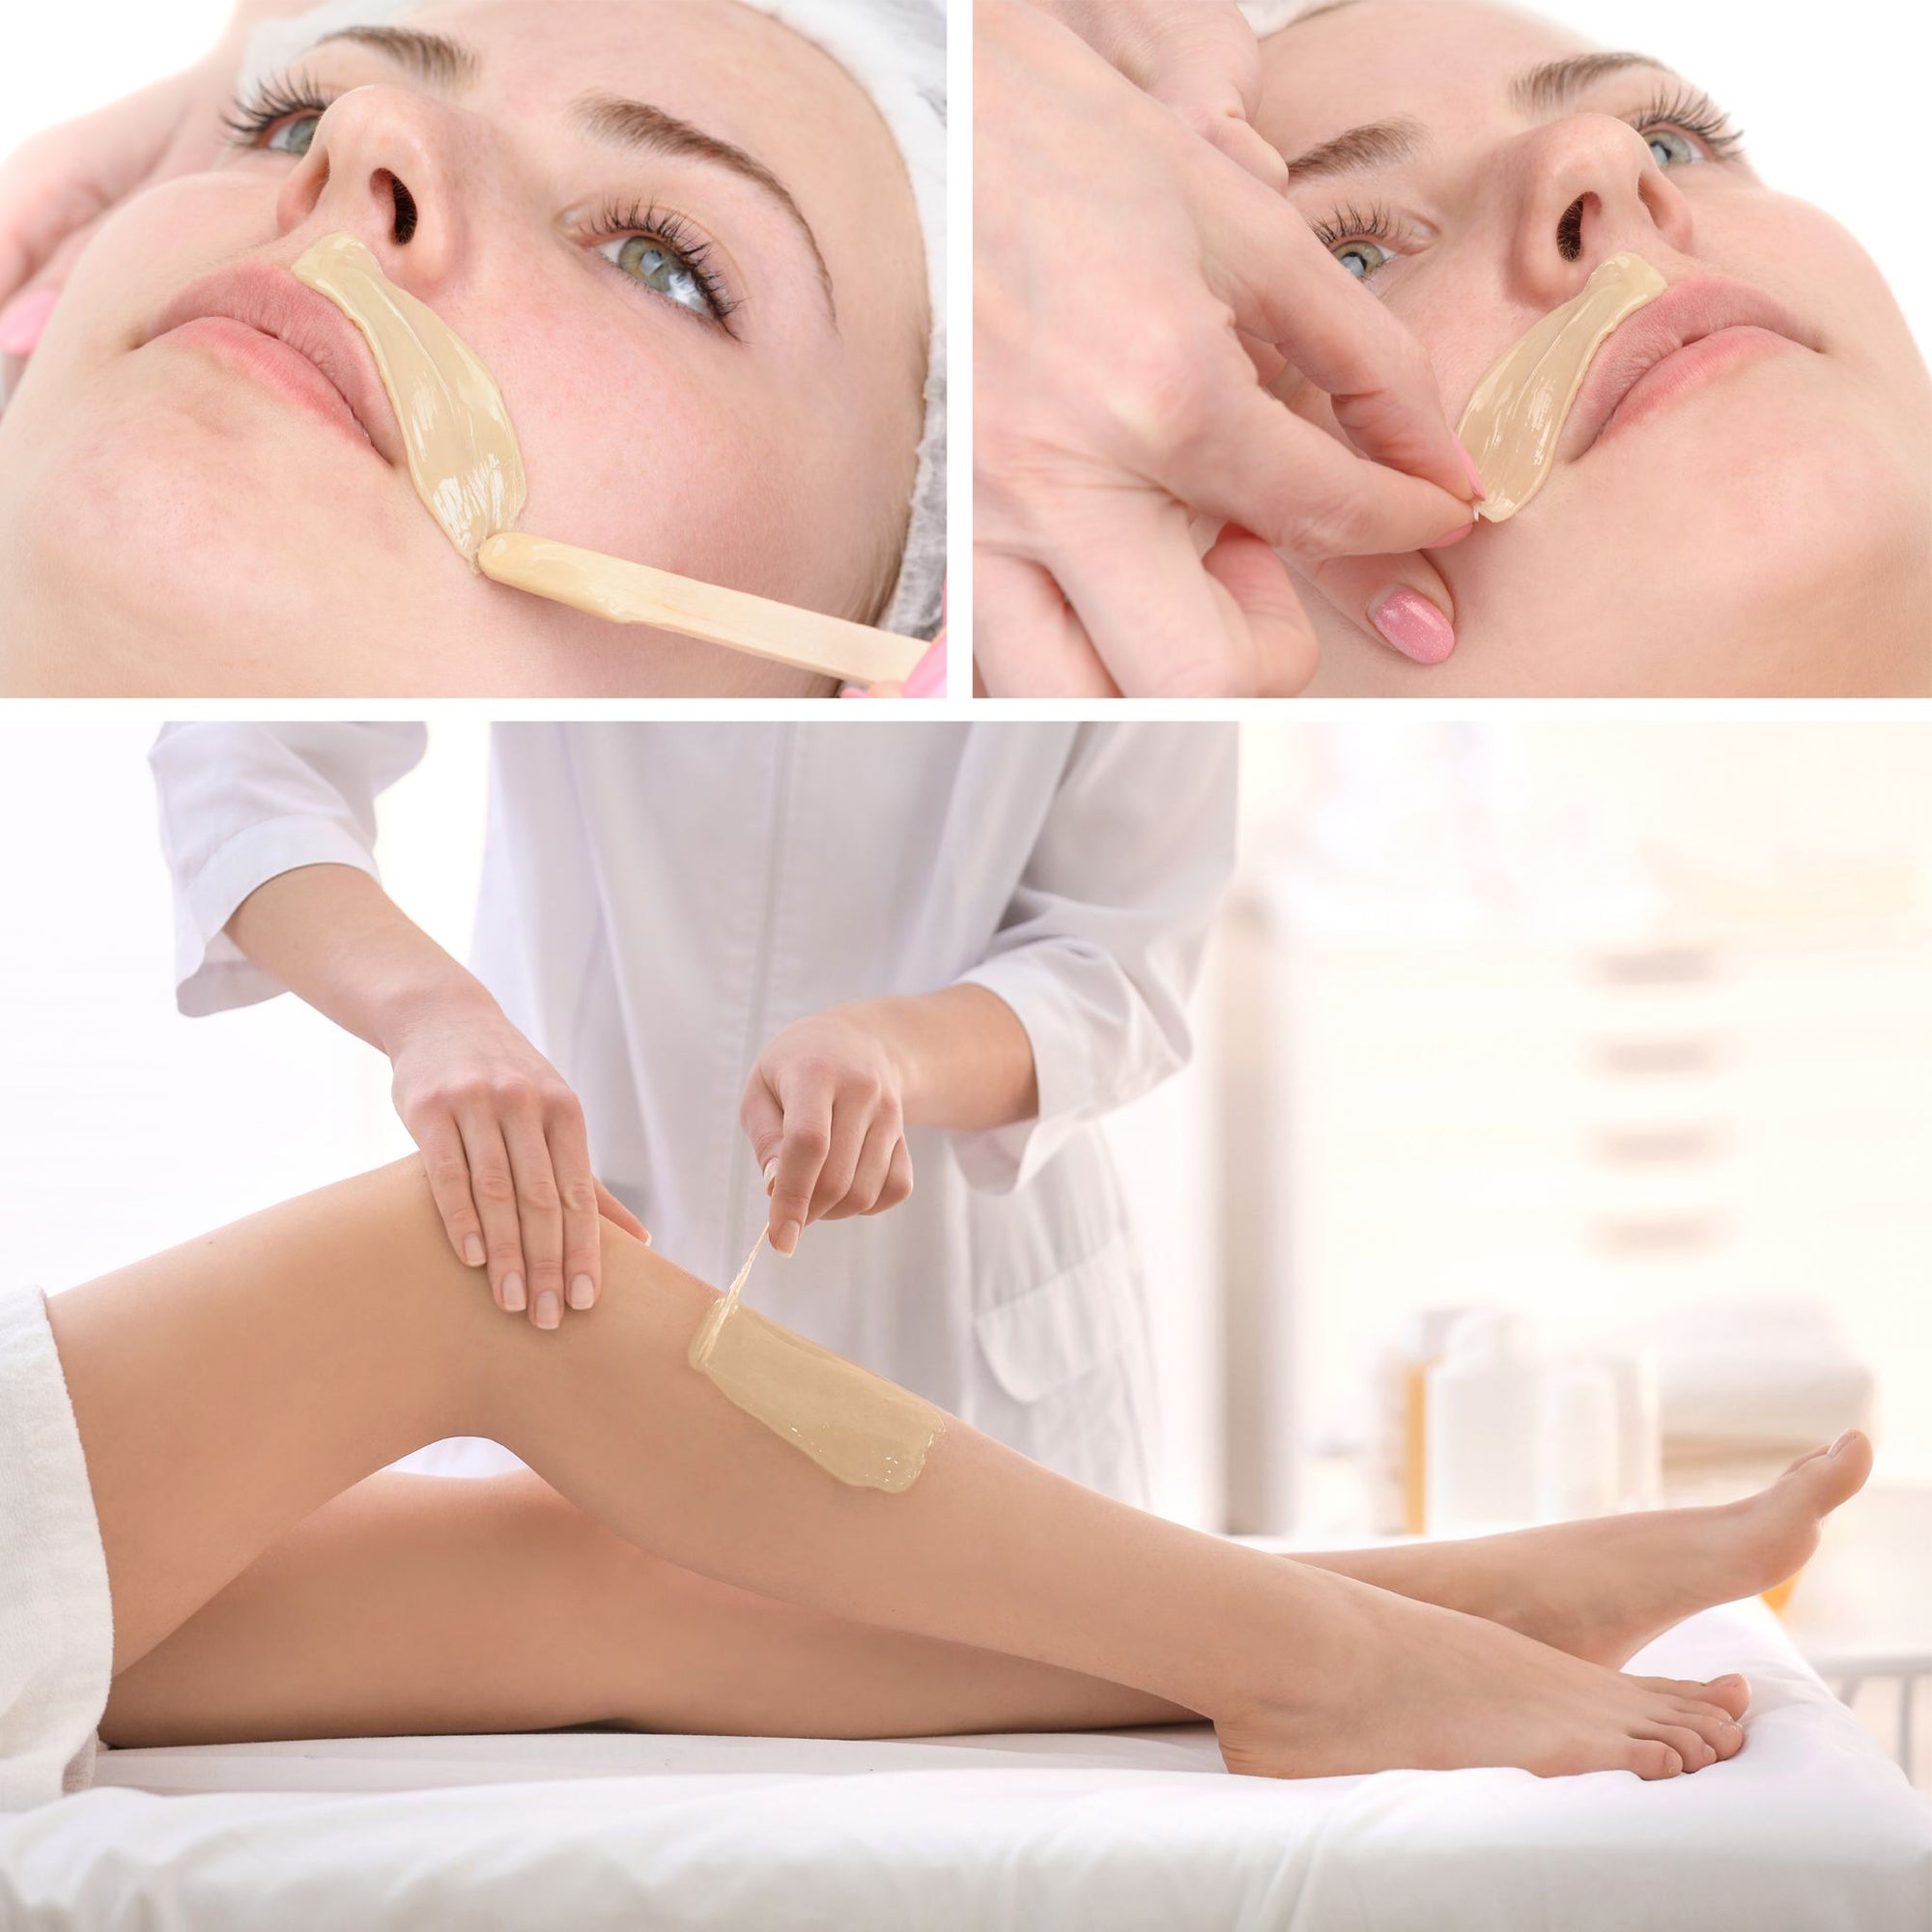 lady having wax applied to upper lip and legs with wooden spatula